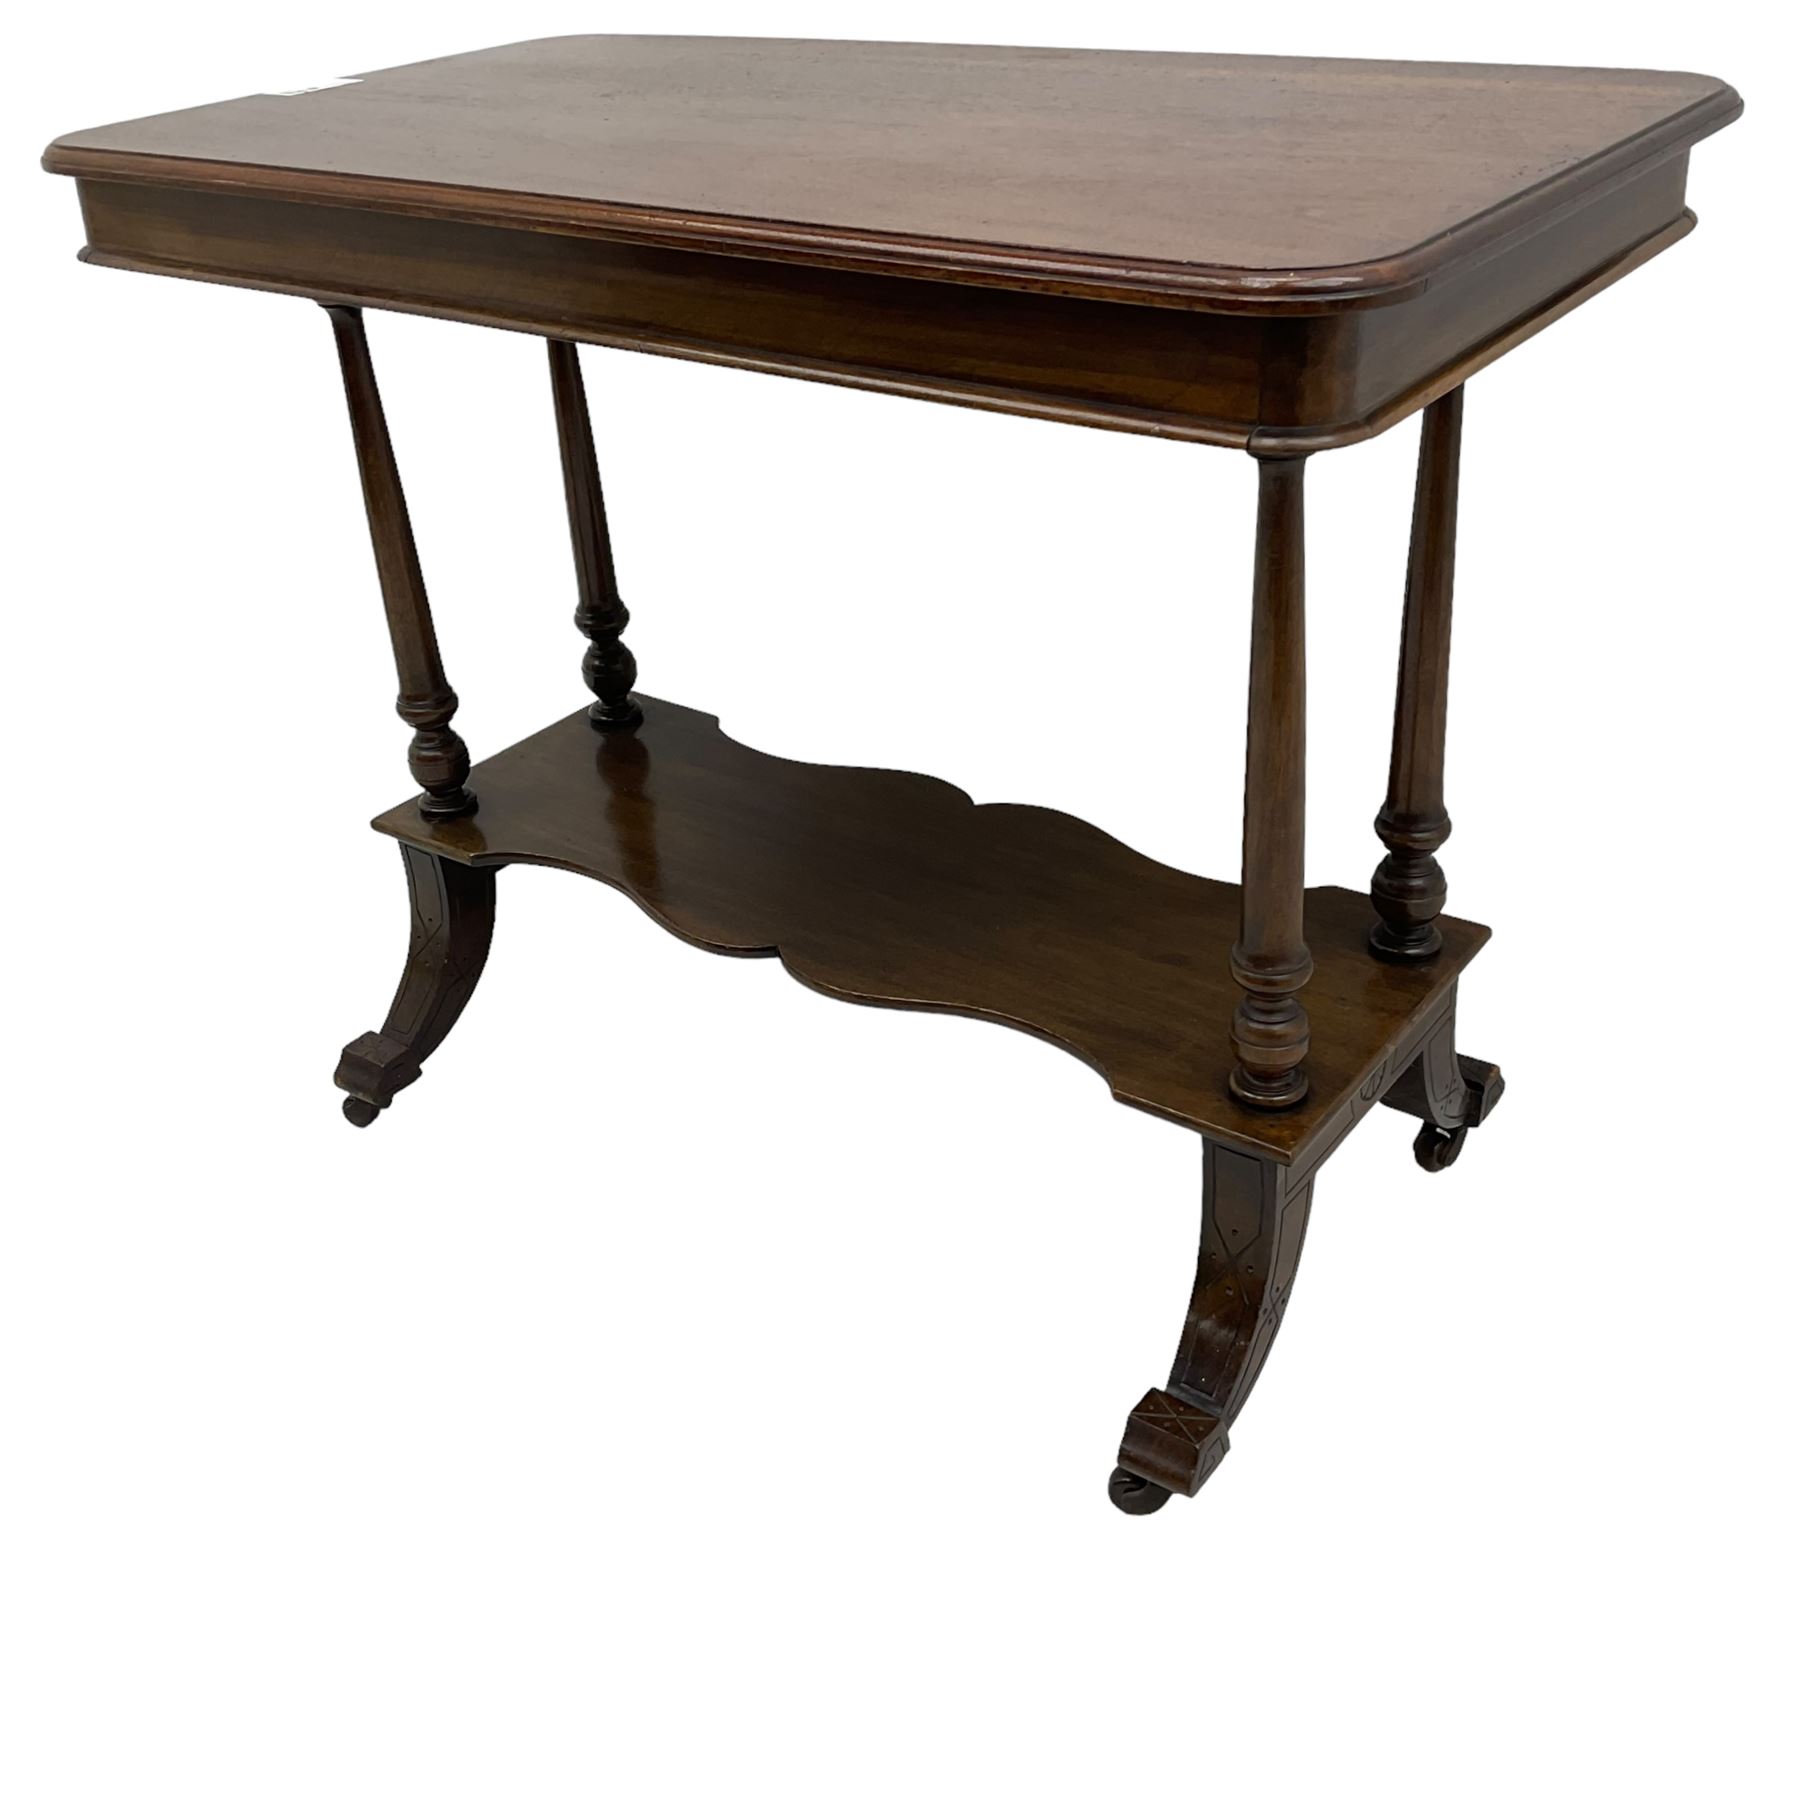 Late Victorian mahogany Aesthetic movement side table - Image 3 of 8